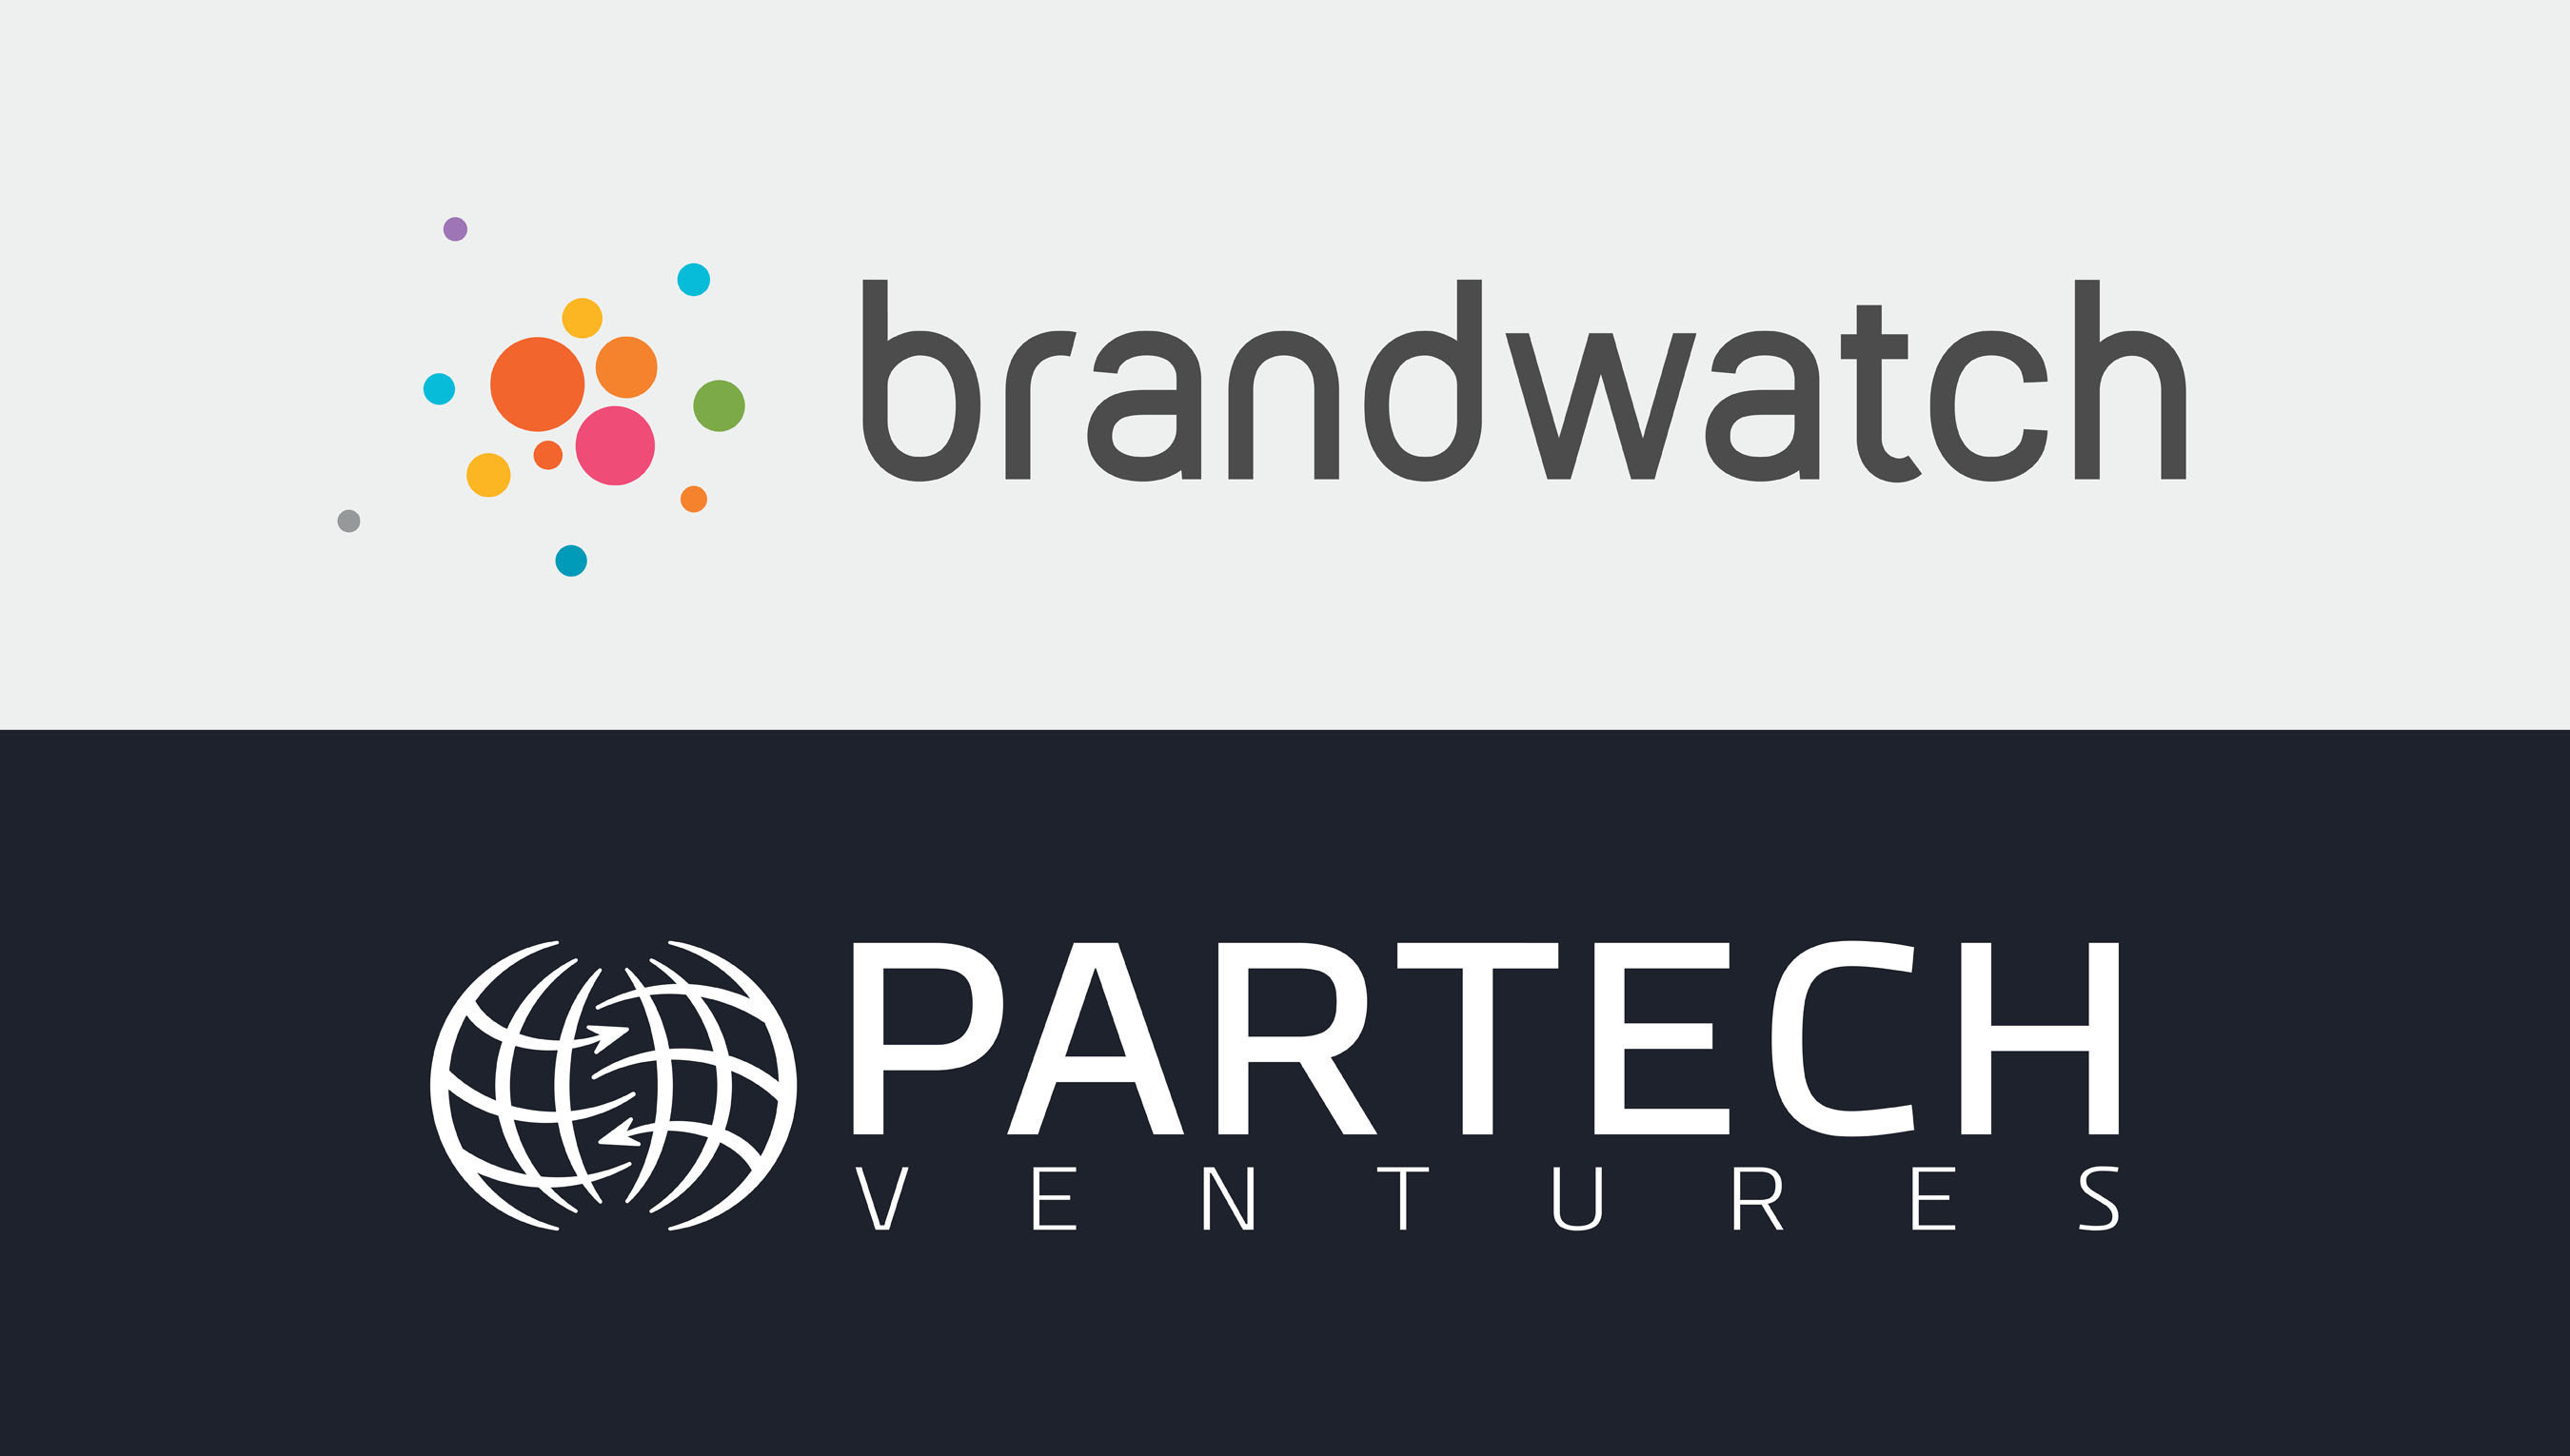 Brandwatch raises Series C funding round from French VC Partech Ventures.